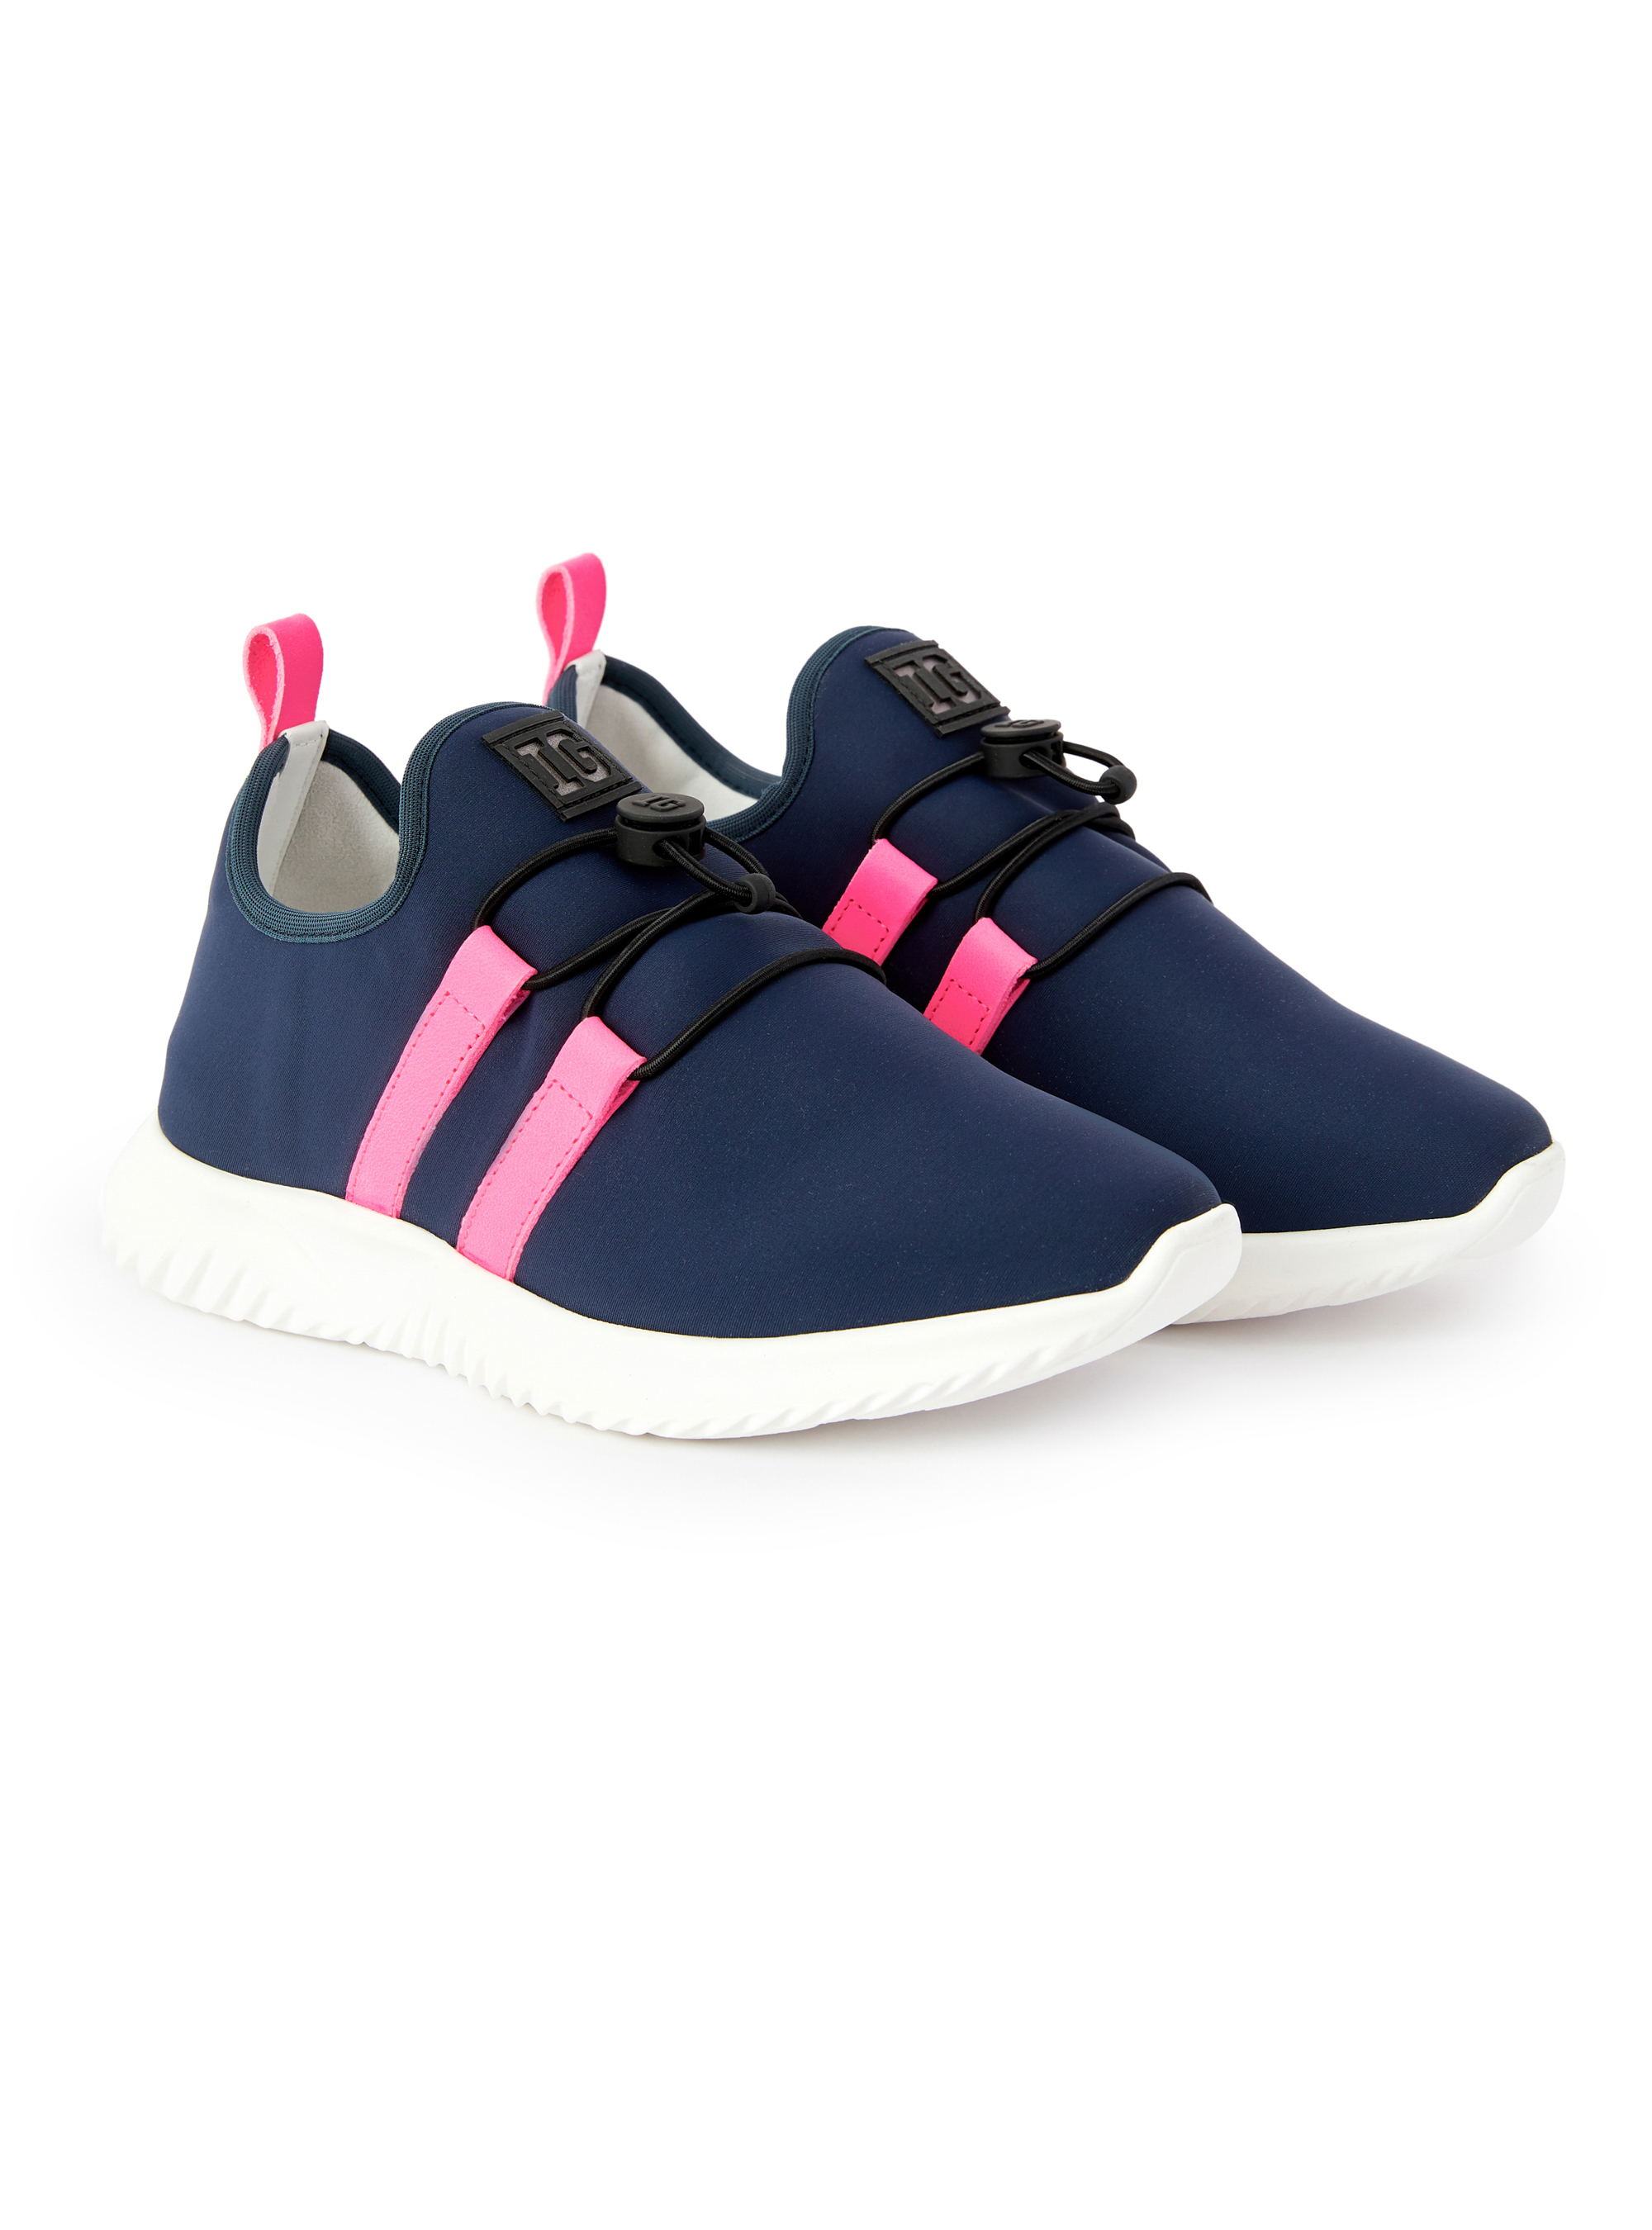 Neoprene sneakers with fuchsia inserts - Shoes - Il Gufo